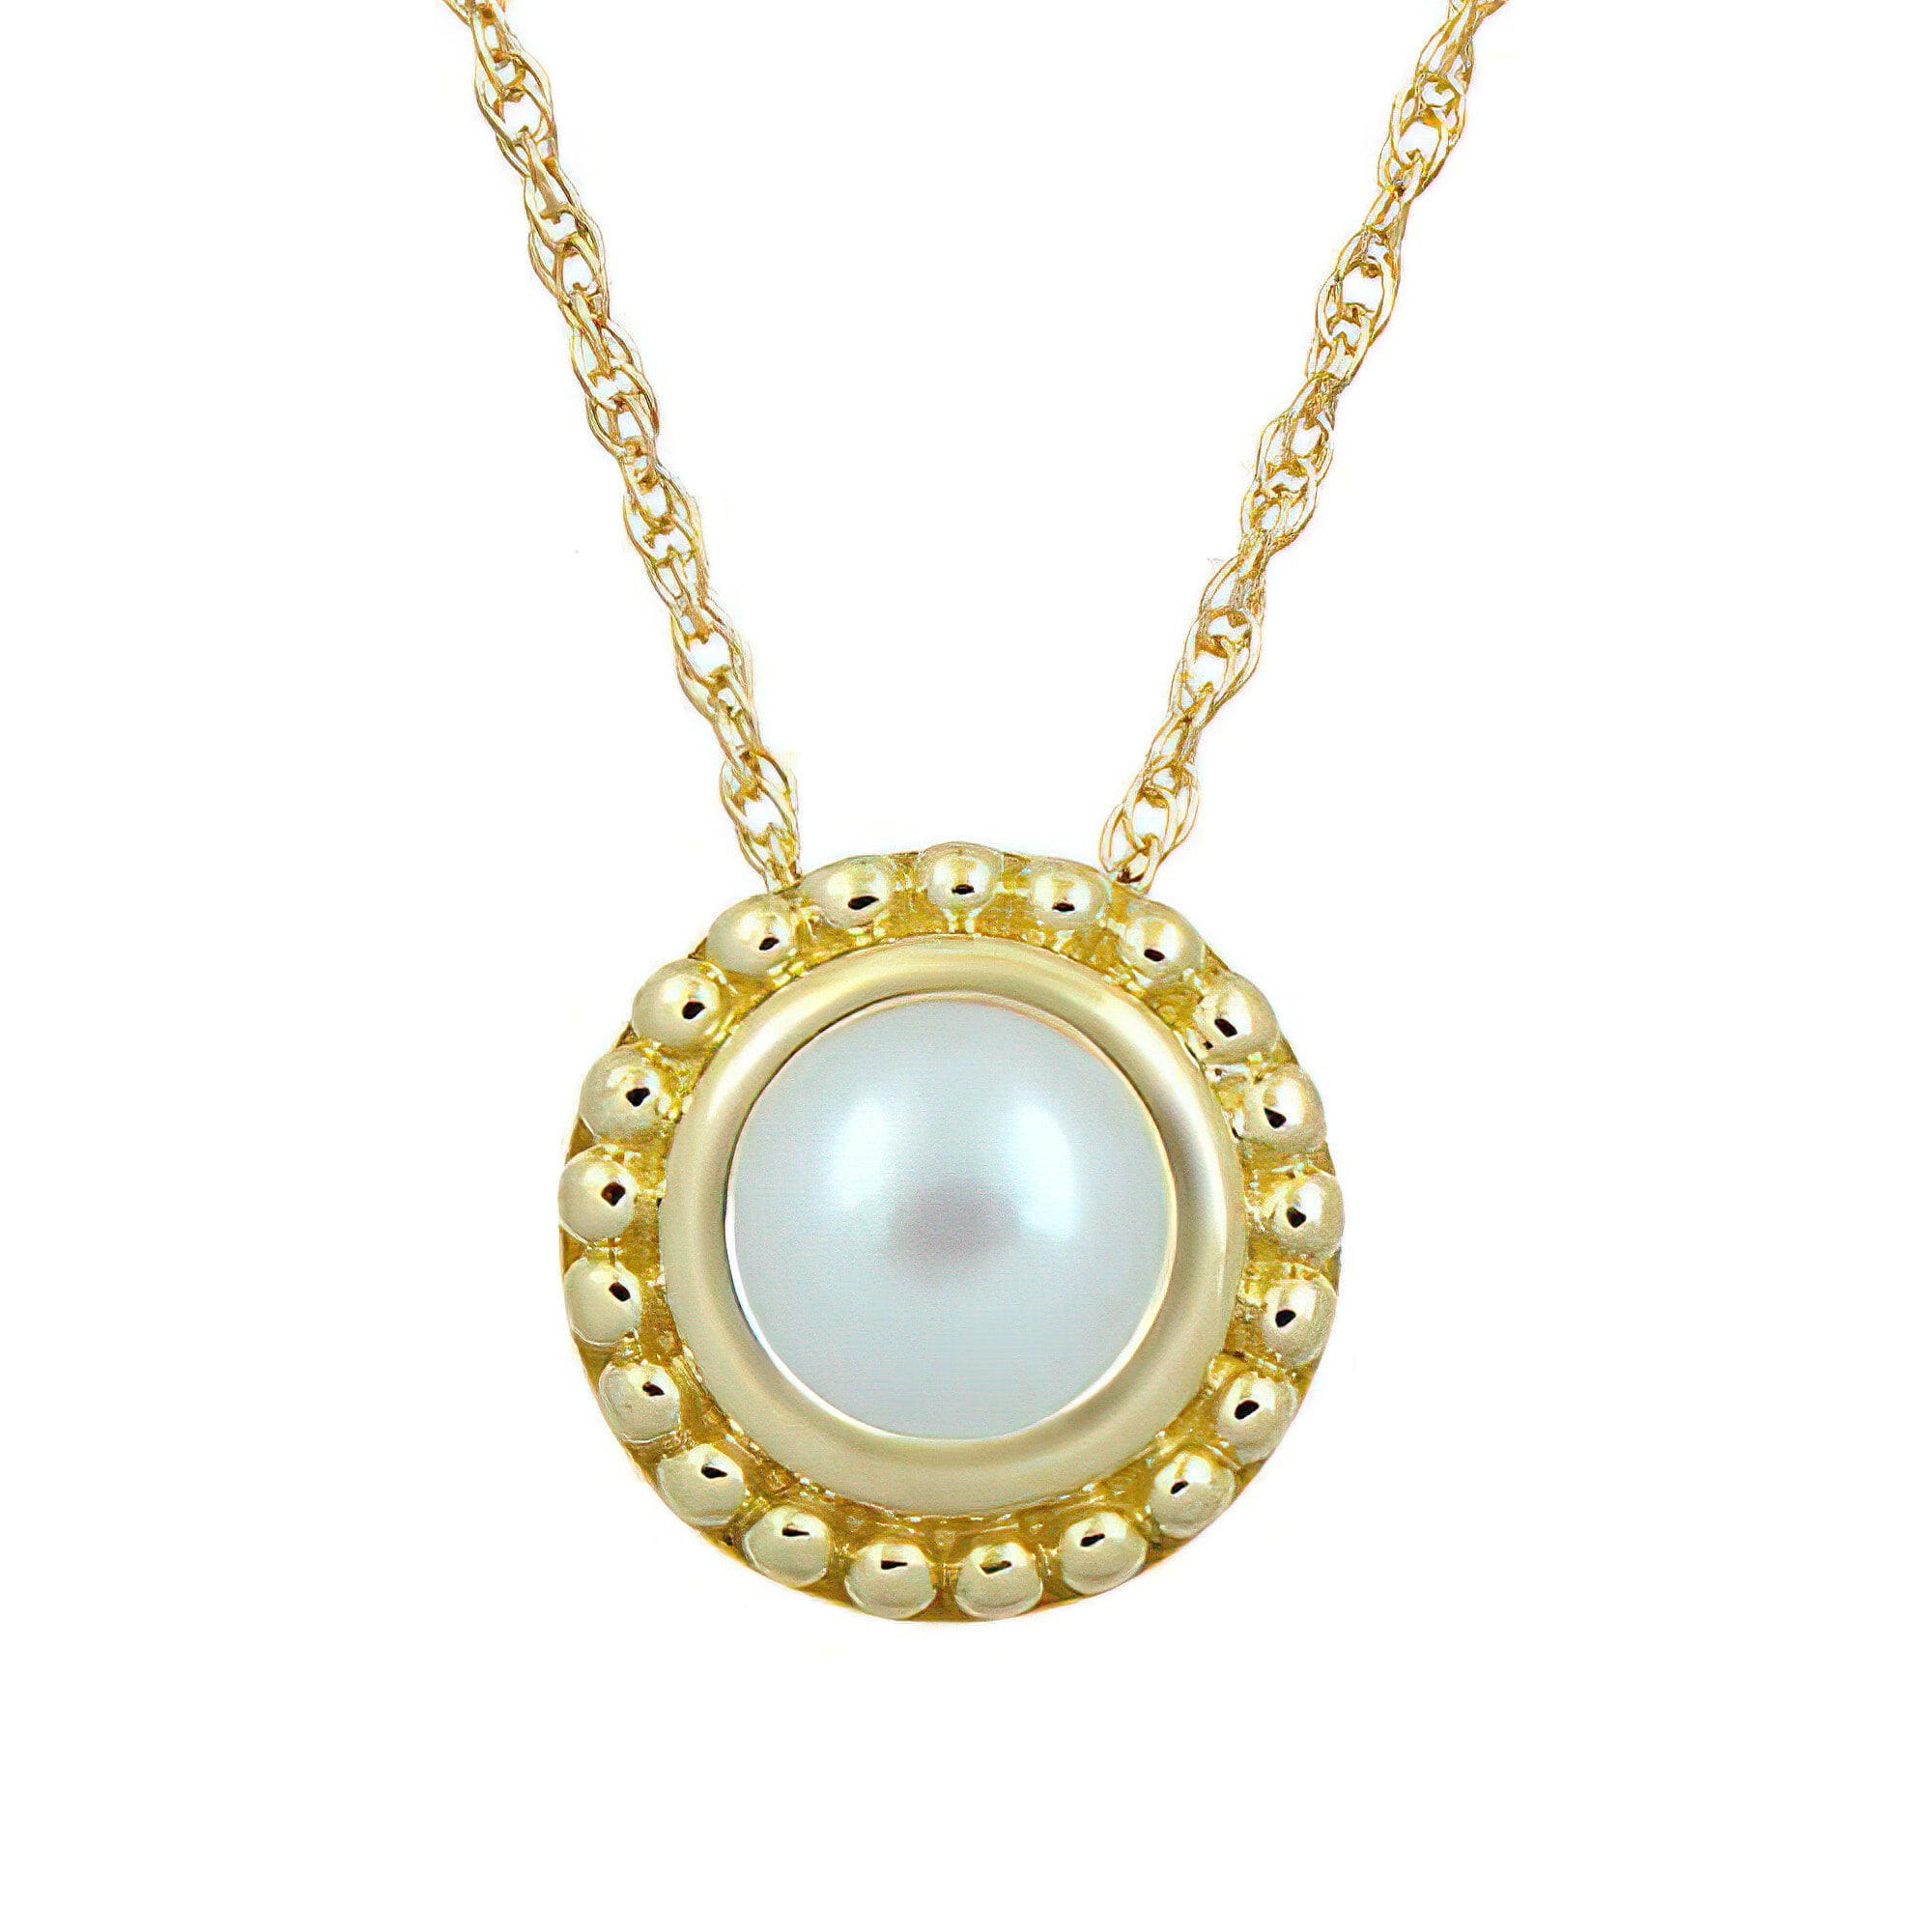 Jewelili 10K Yellow Gold with 5 MM Round Button Pearl Pendant Necklace ...